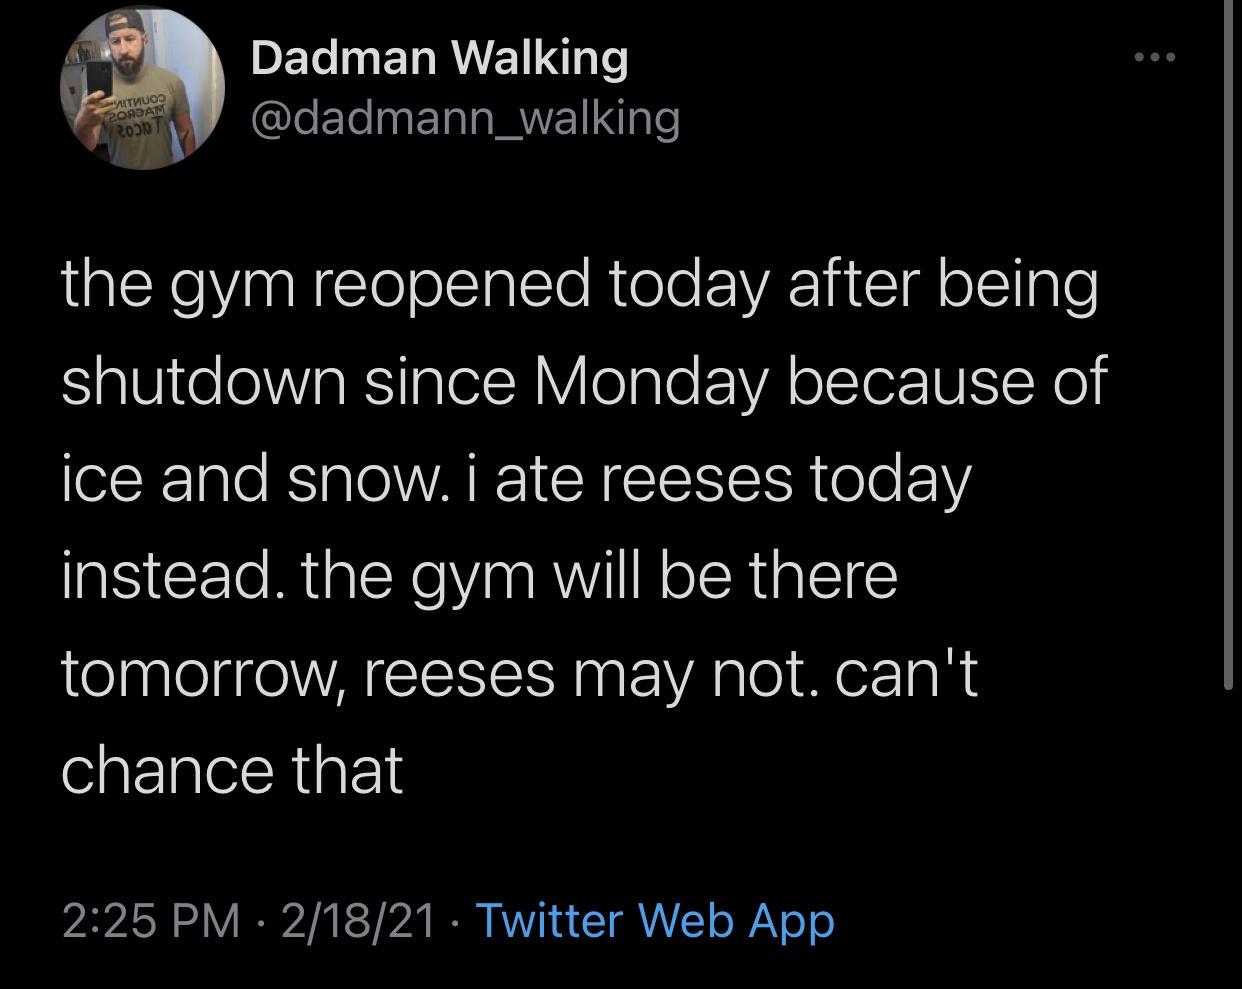 female hustlers quotes 2020 - e Dadman Walking Pog VR05 the gym reopened today after being shutdown since Monday because of ice and snow. i ate reeses today instead. the gym will be there tomorrow, reeses may not. can't chance that 21821 Twitter Web App